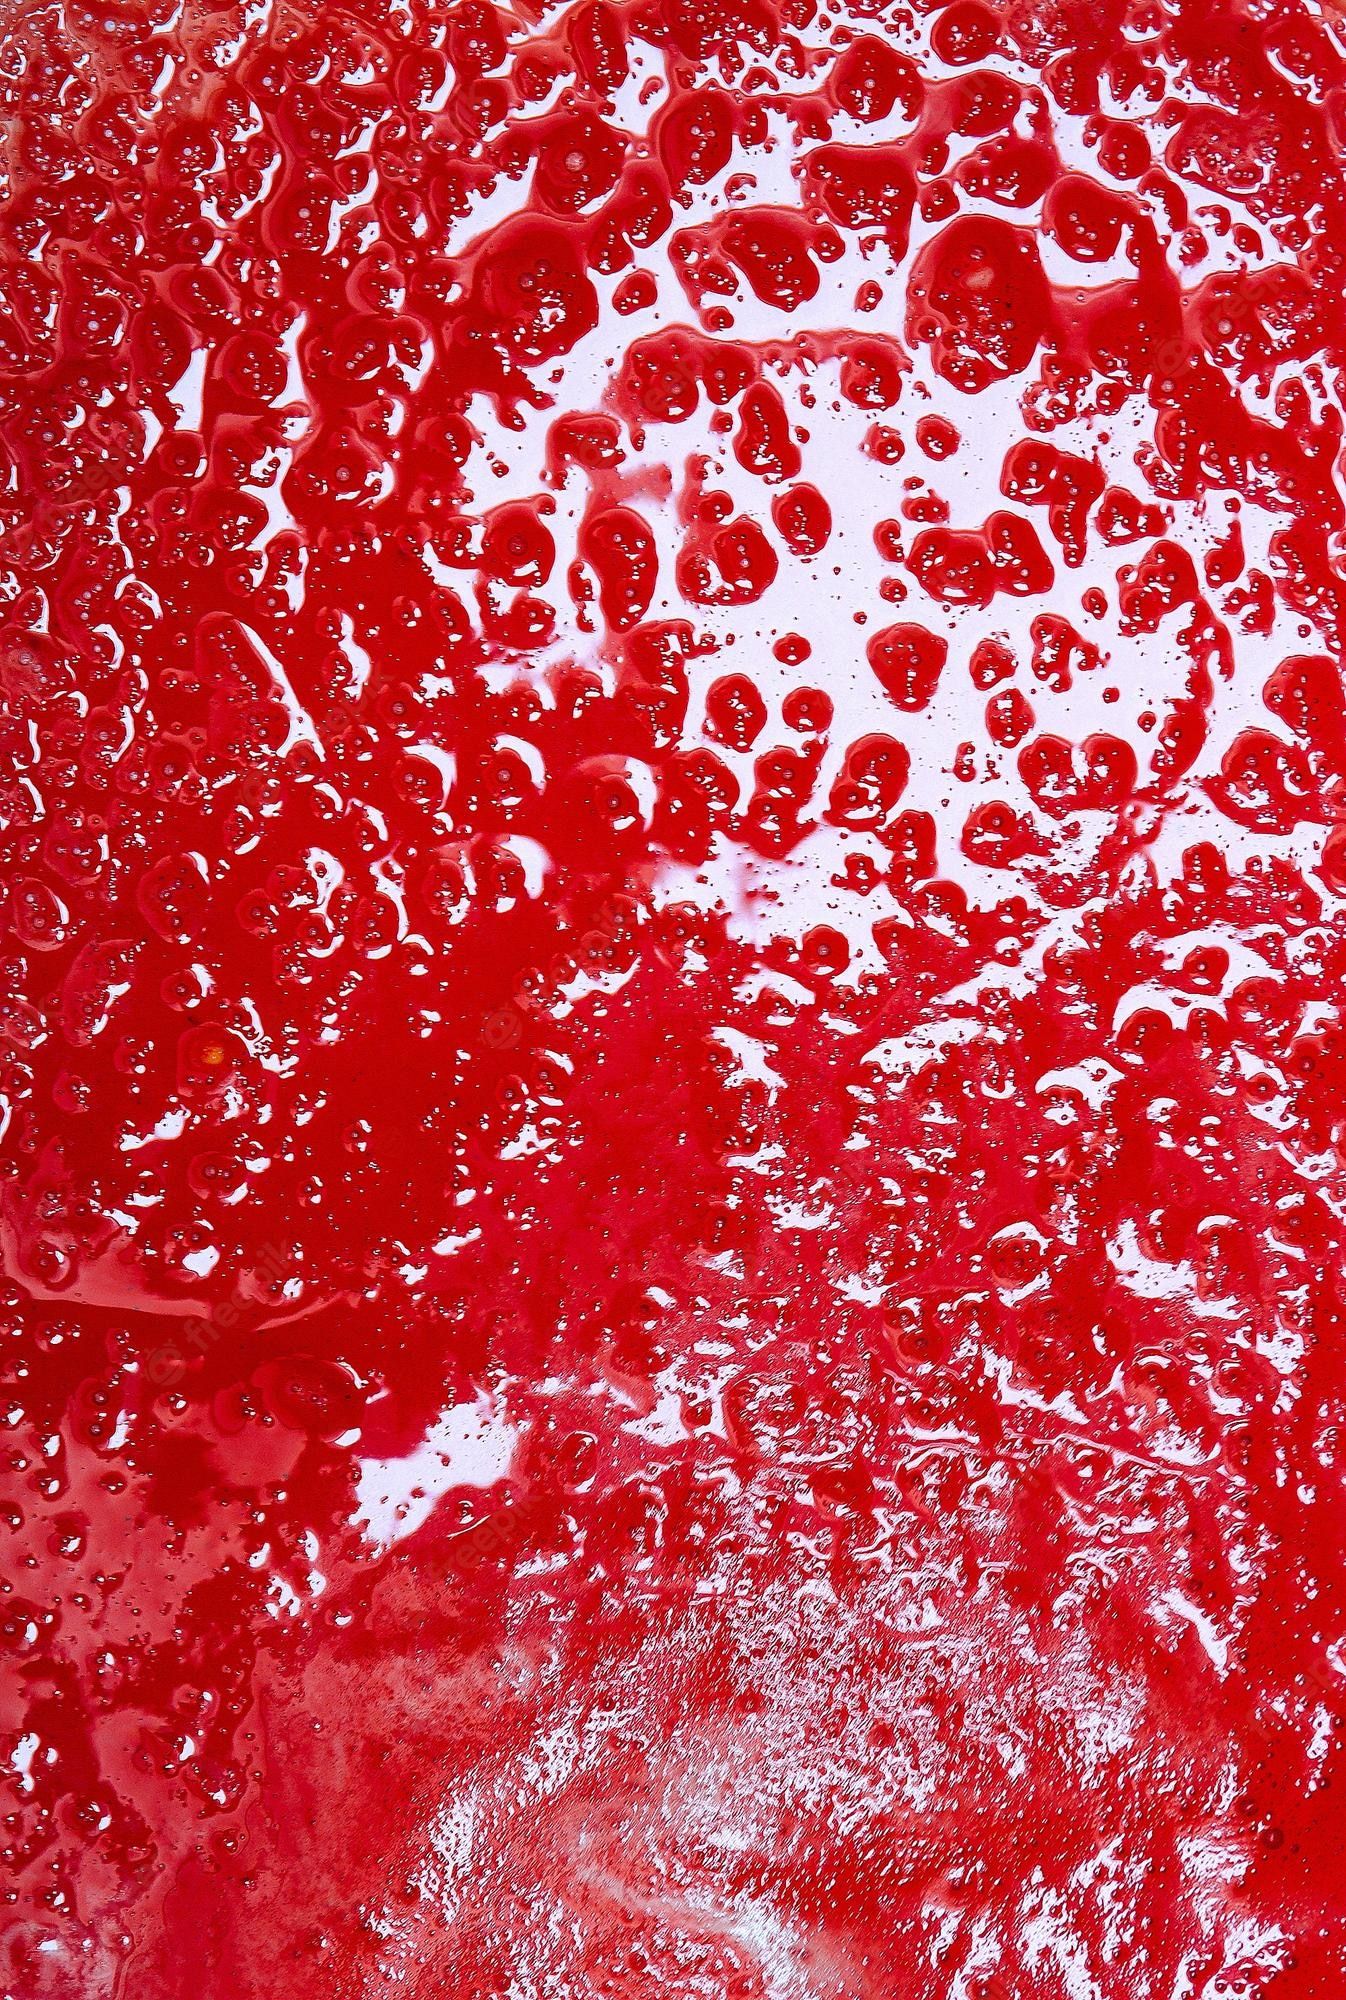 A close up of a red surface with water droplets on it - Blood